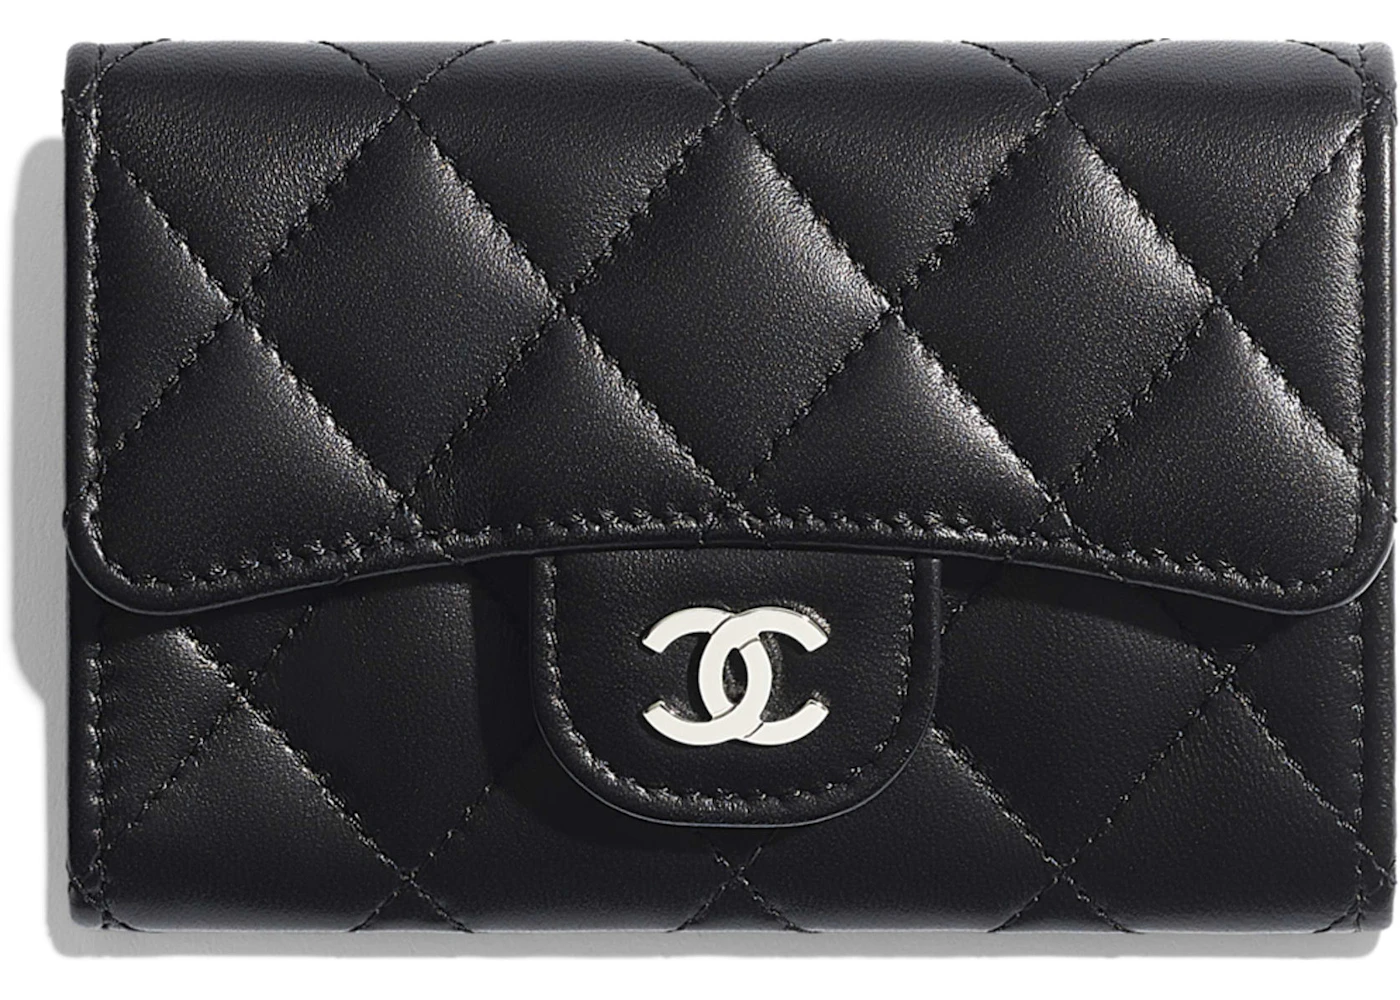 Chanel Classic Card Holder Review - The BEST Card Holder